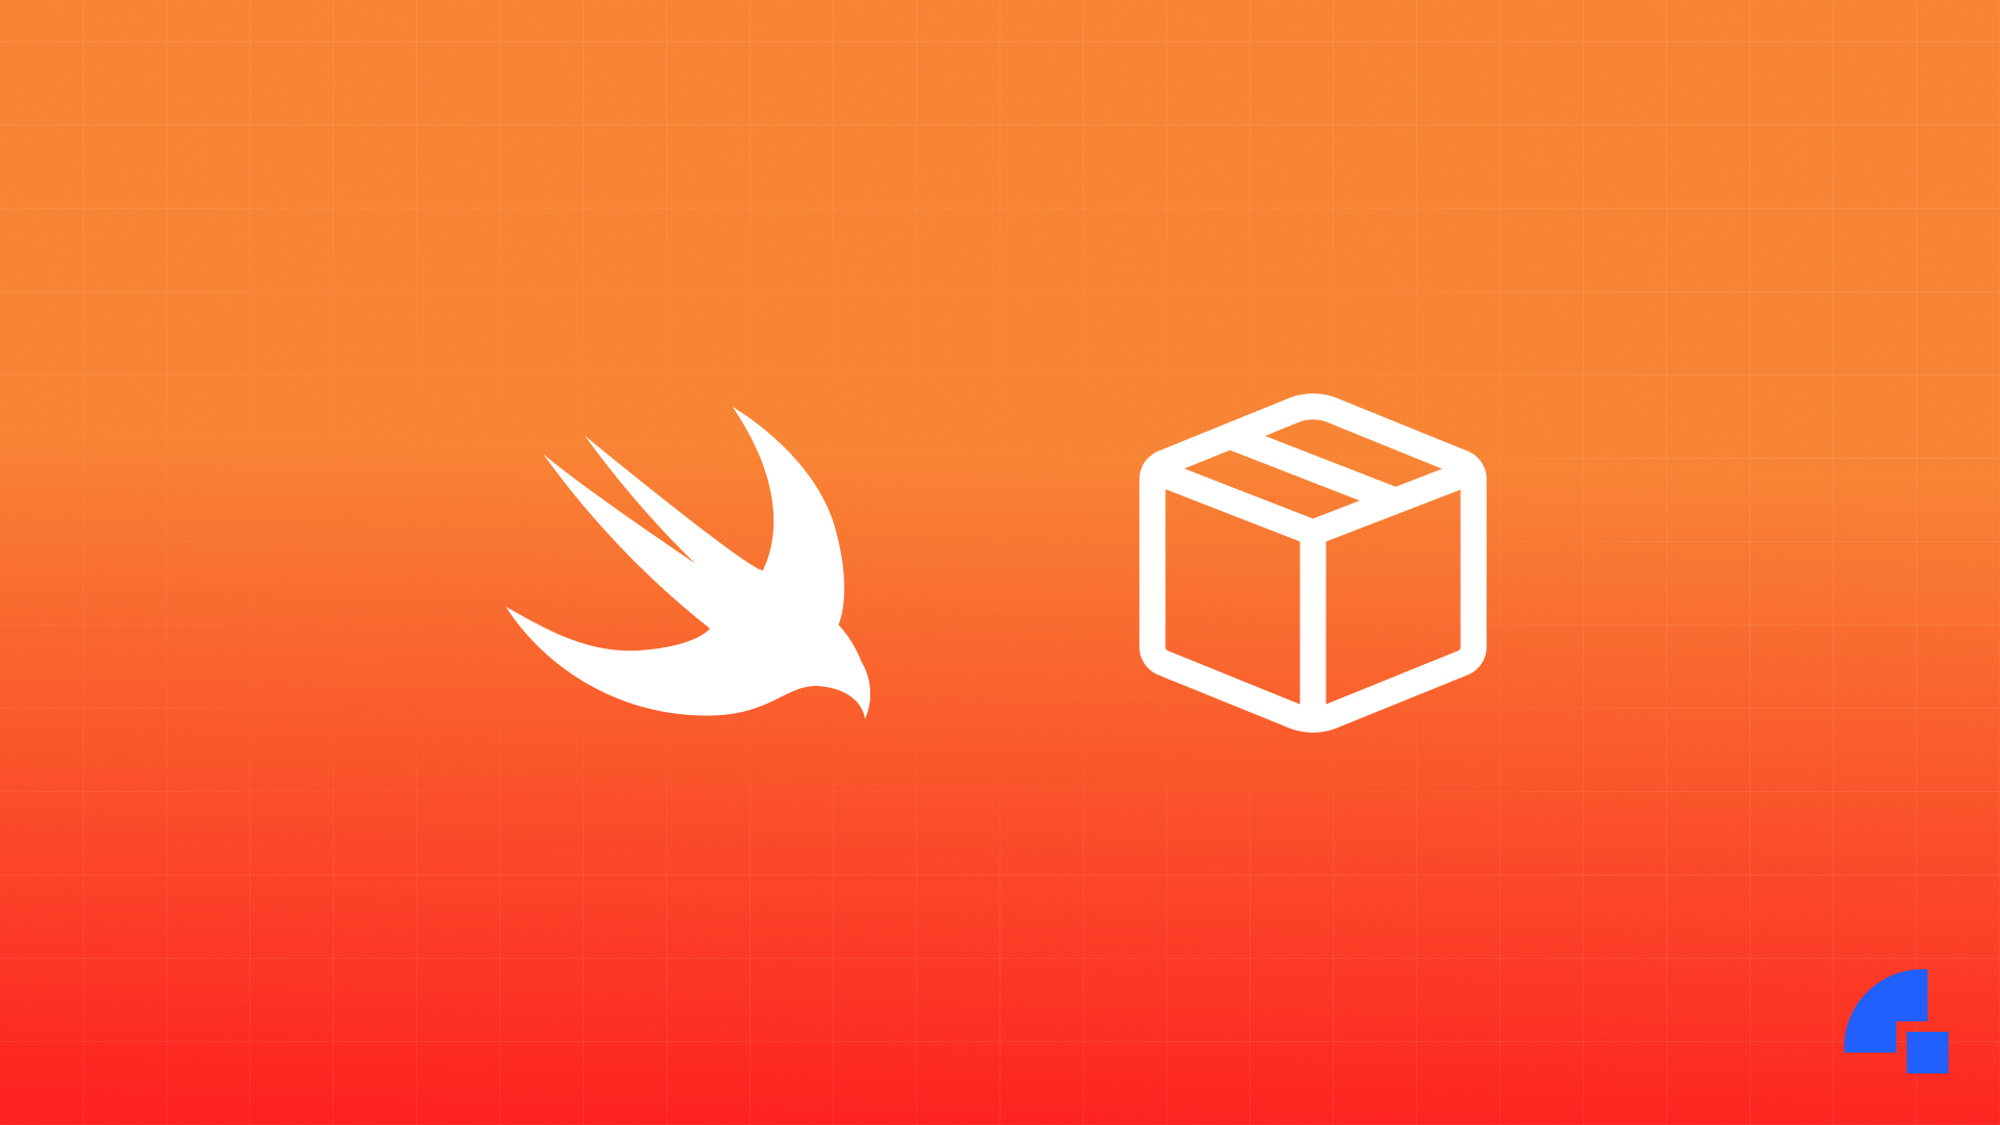 Swift package manager